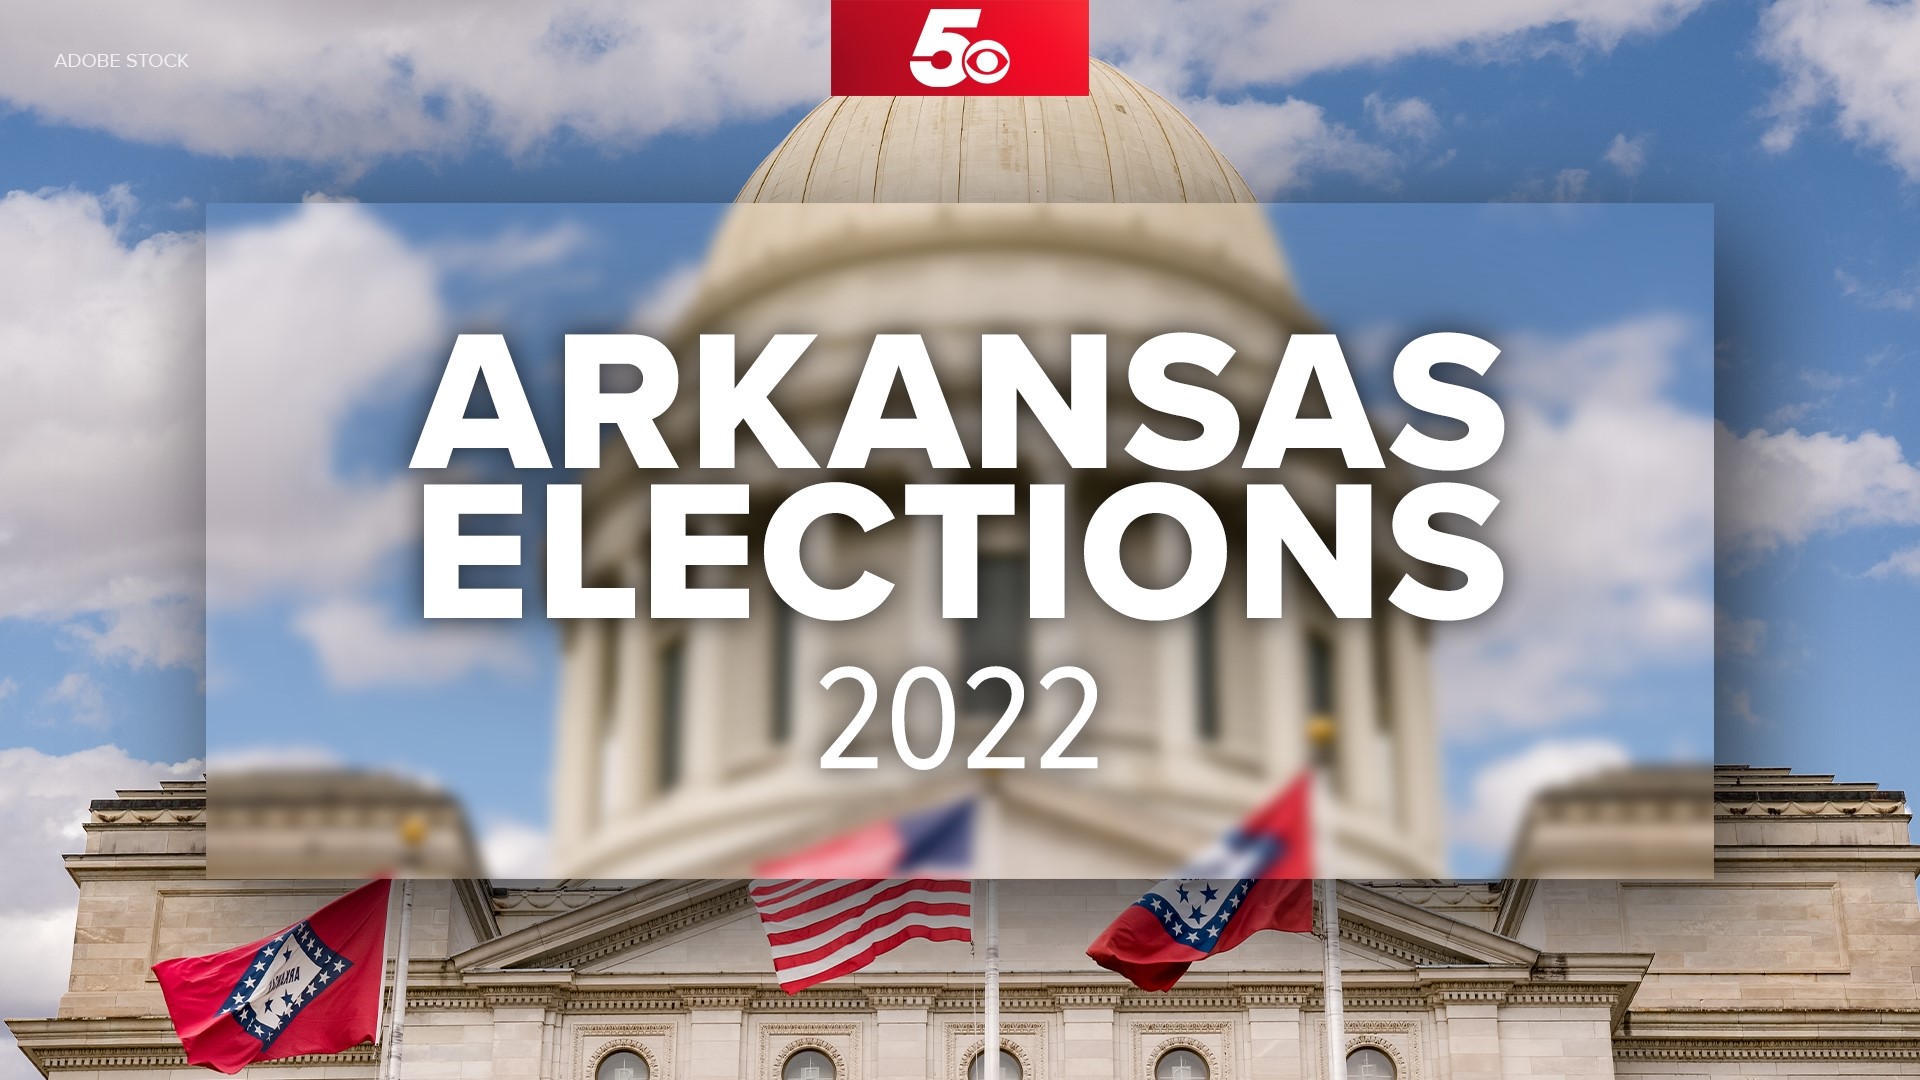 Sarah Huckabee Sanders is projected to be the first female governor of Arkansas.